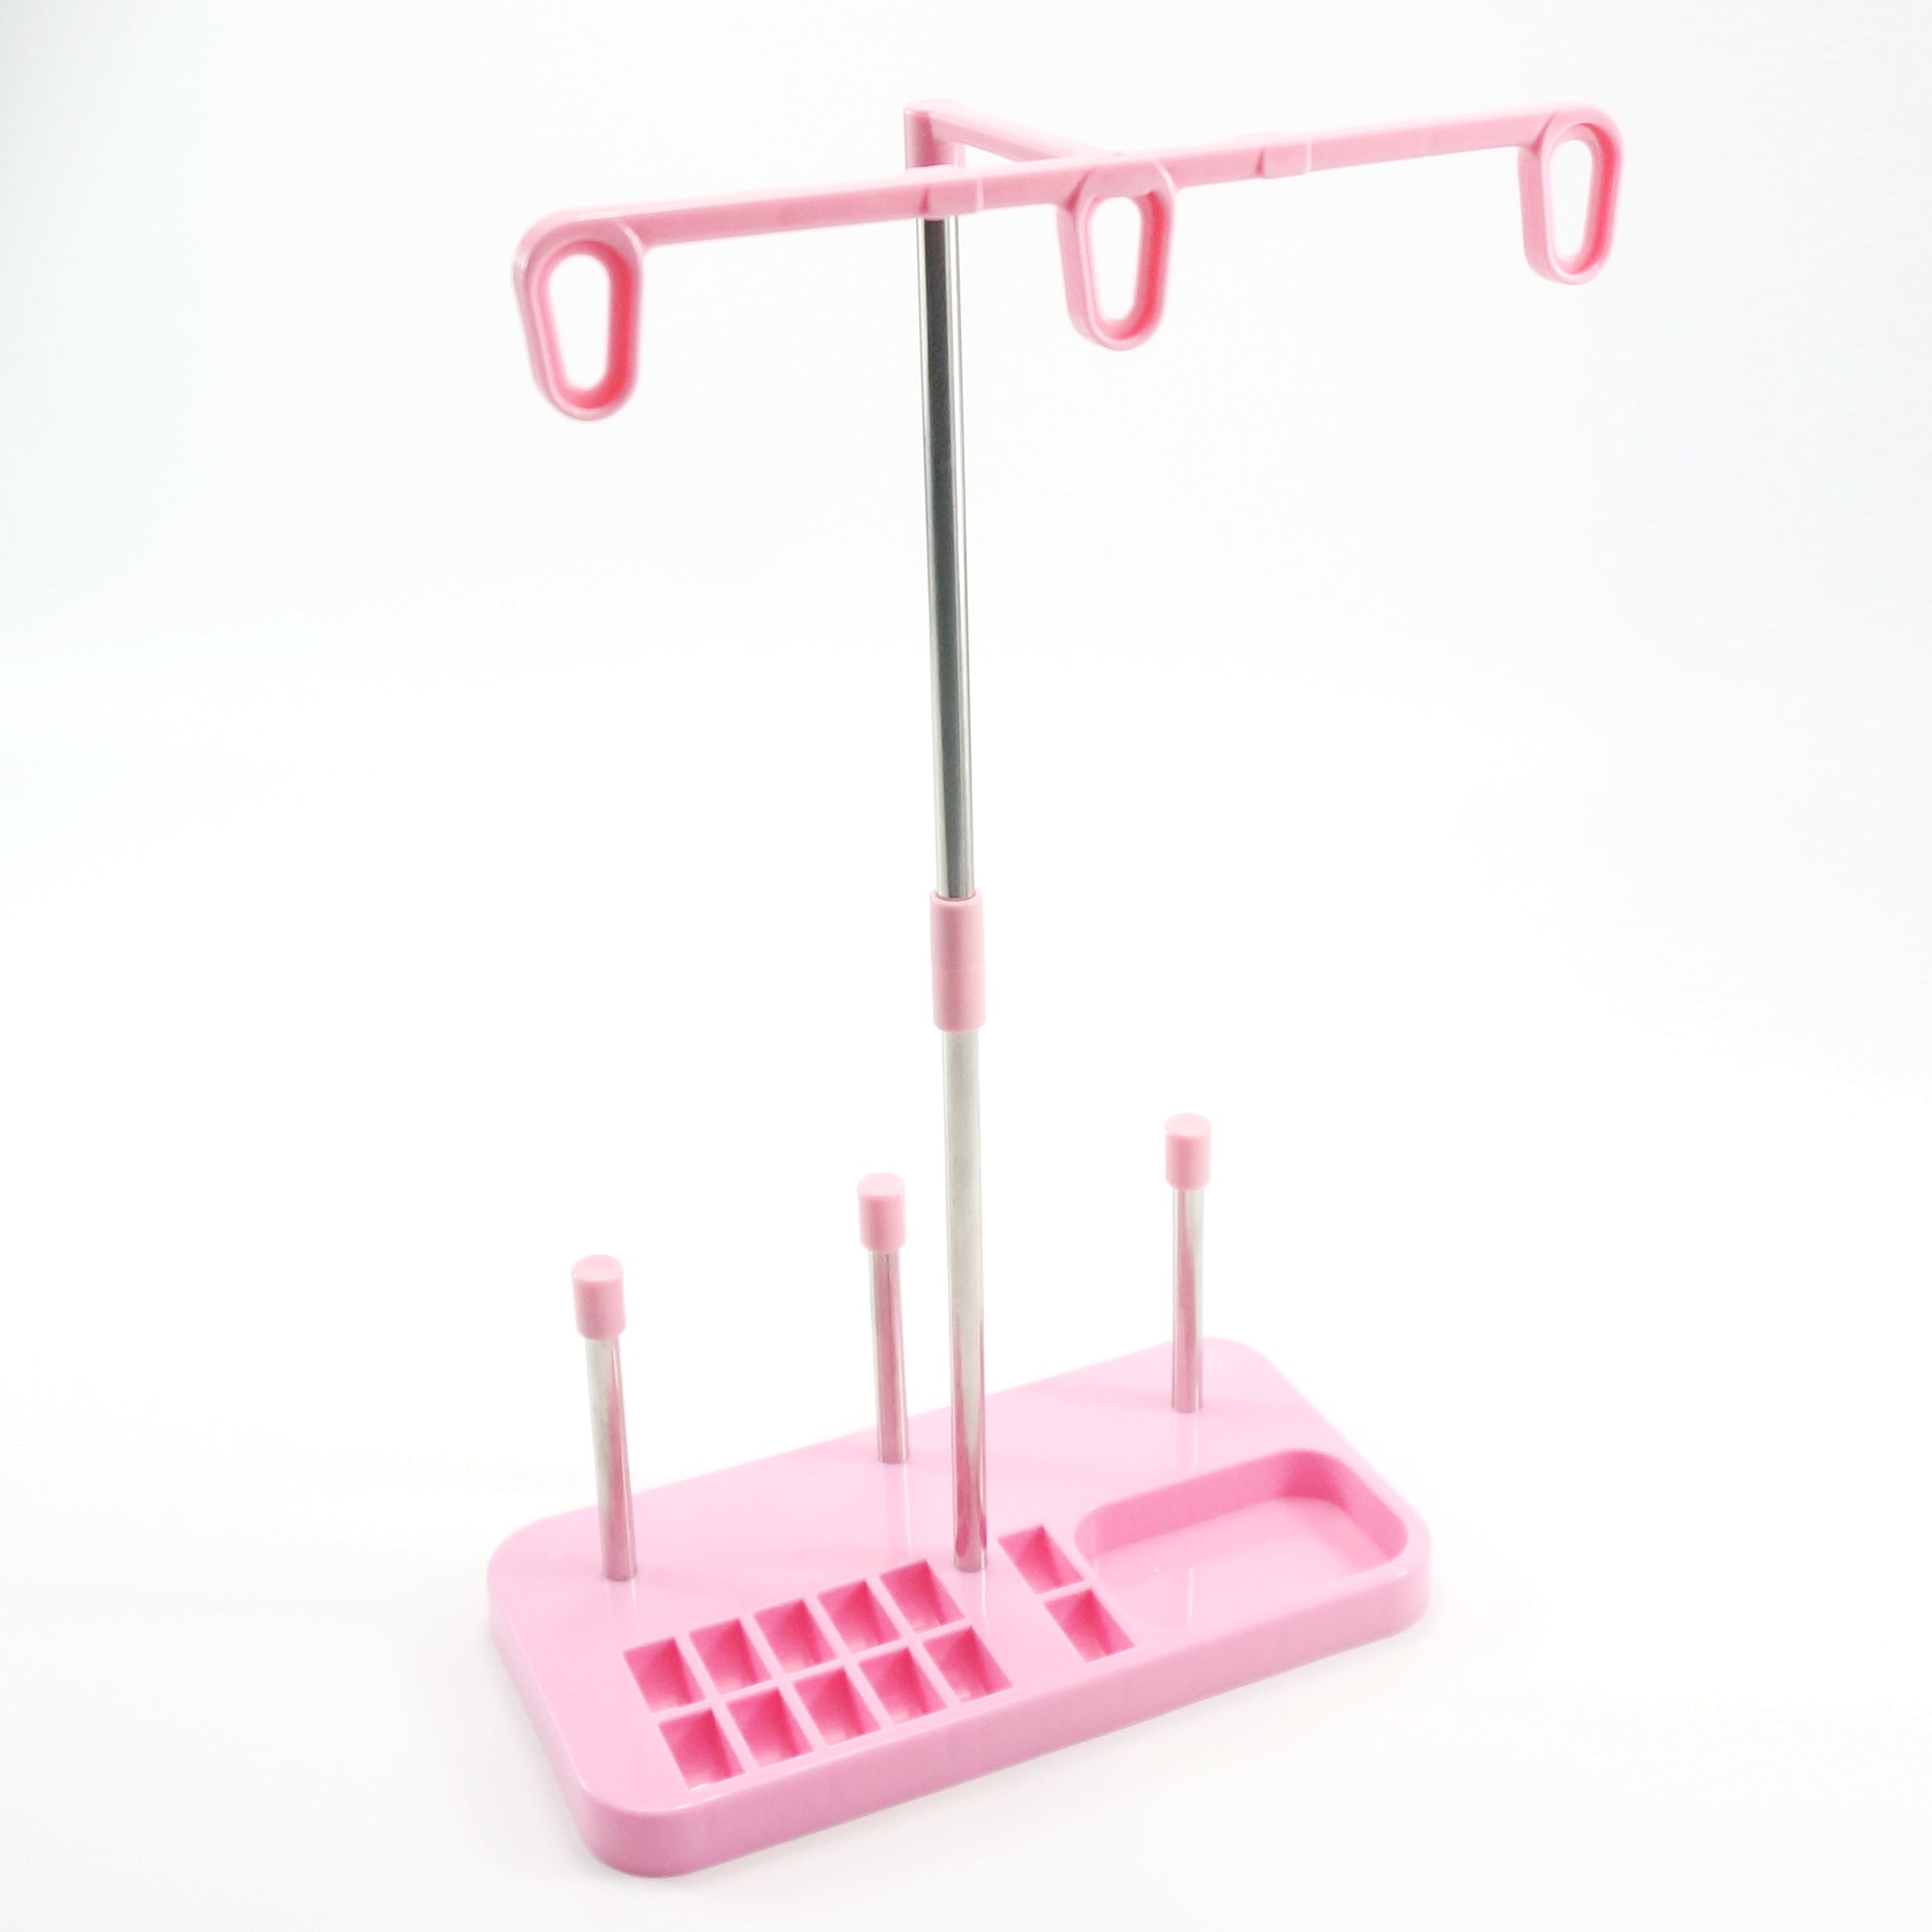 Thread Stand, Alphasew : Sewing Parts Online